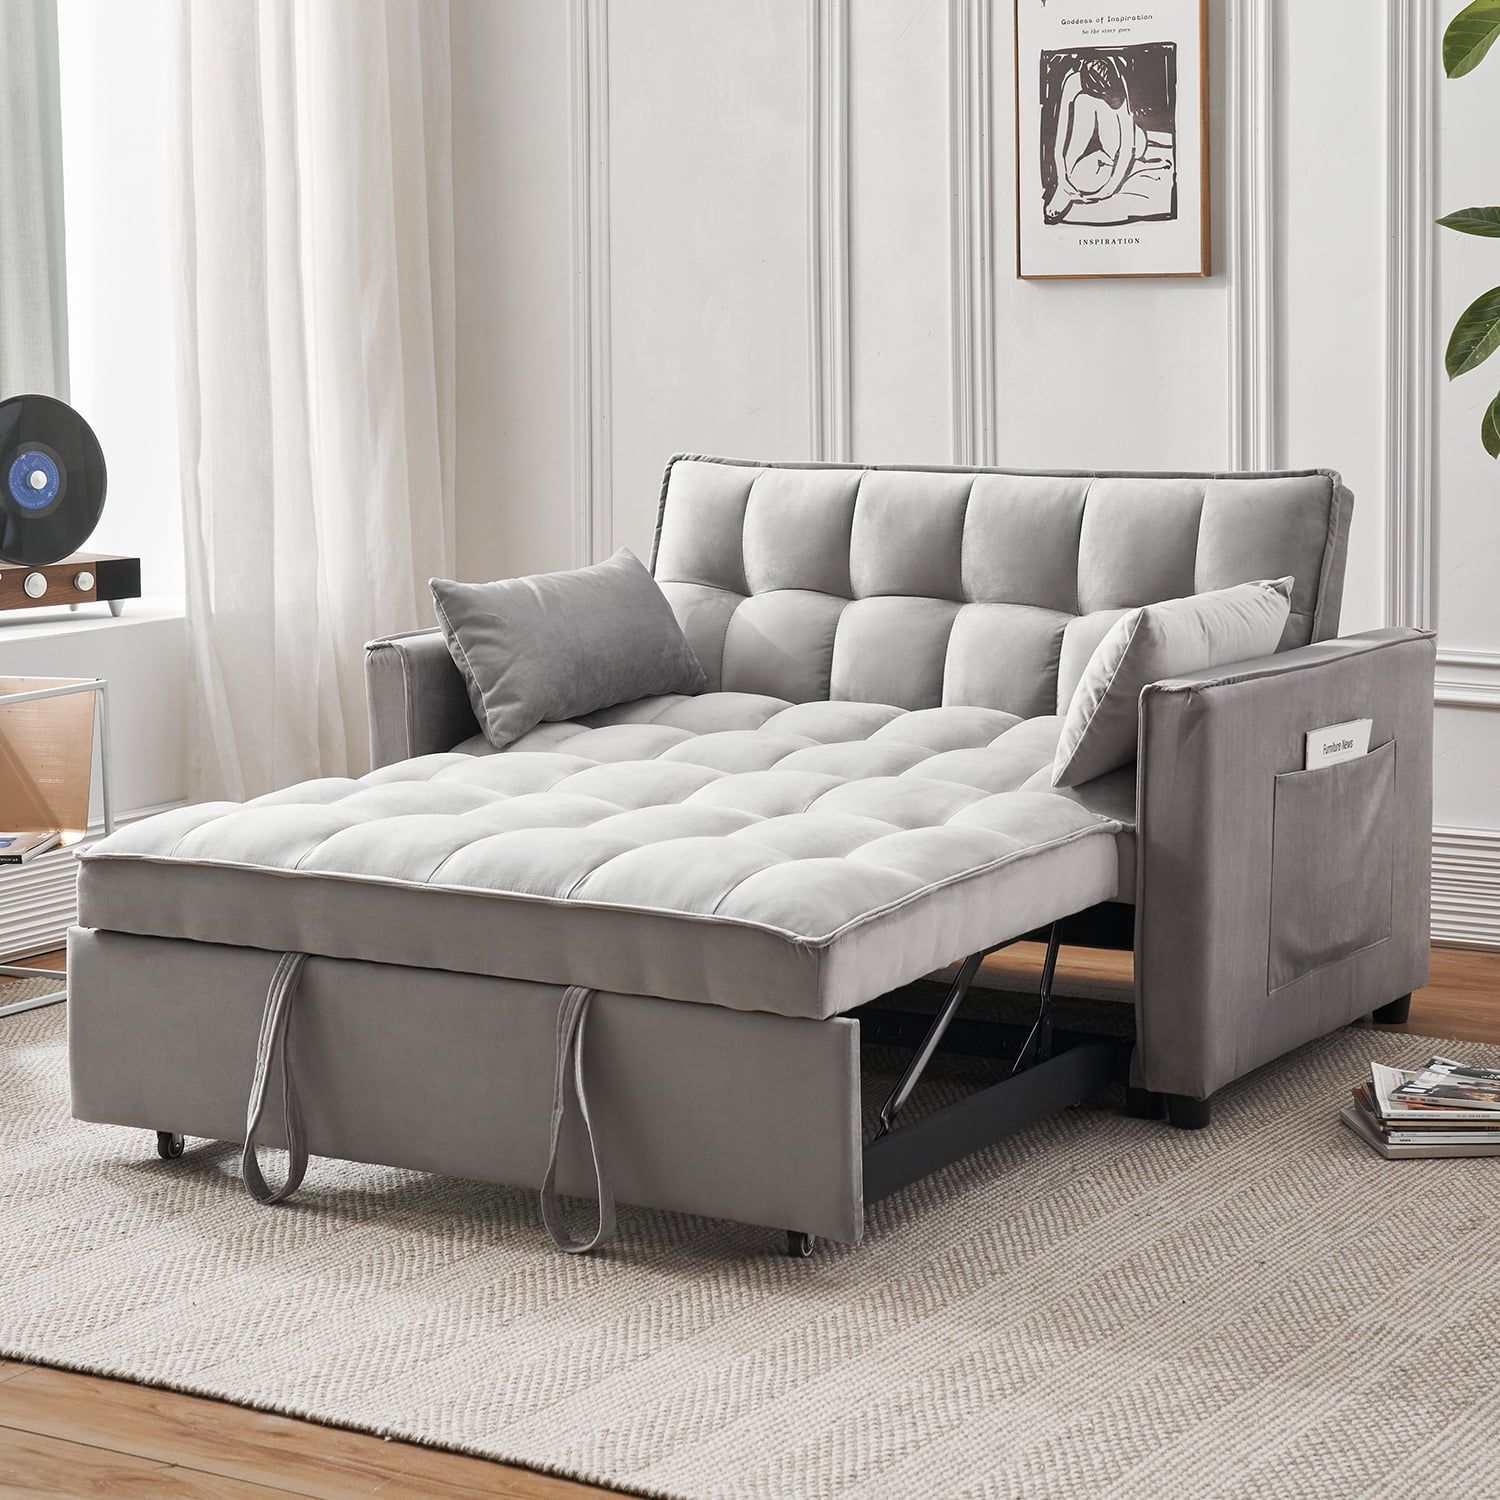 Tzicr 55.5'' 3 In 1 Convertible Sleeper Sofa Bed, Modern Velvet Loveseat  Futon Couch Pullout Bed With Adjustable Backrest, Side Storage Pockets And  Pillows (View 4 of 15)